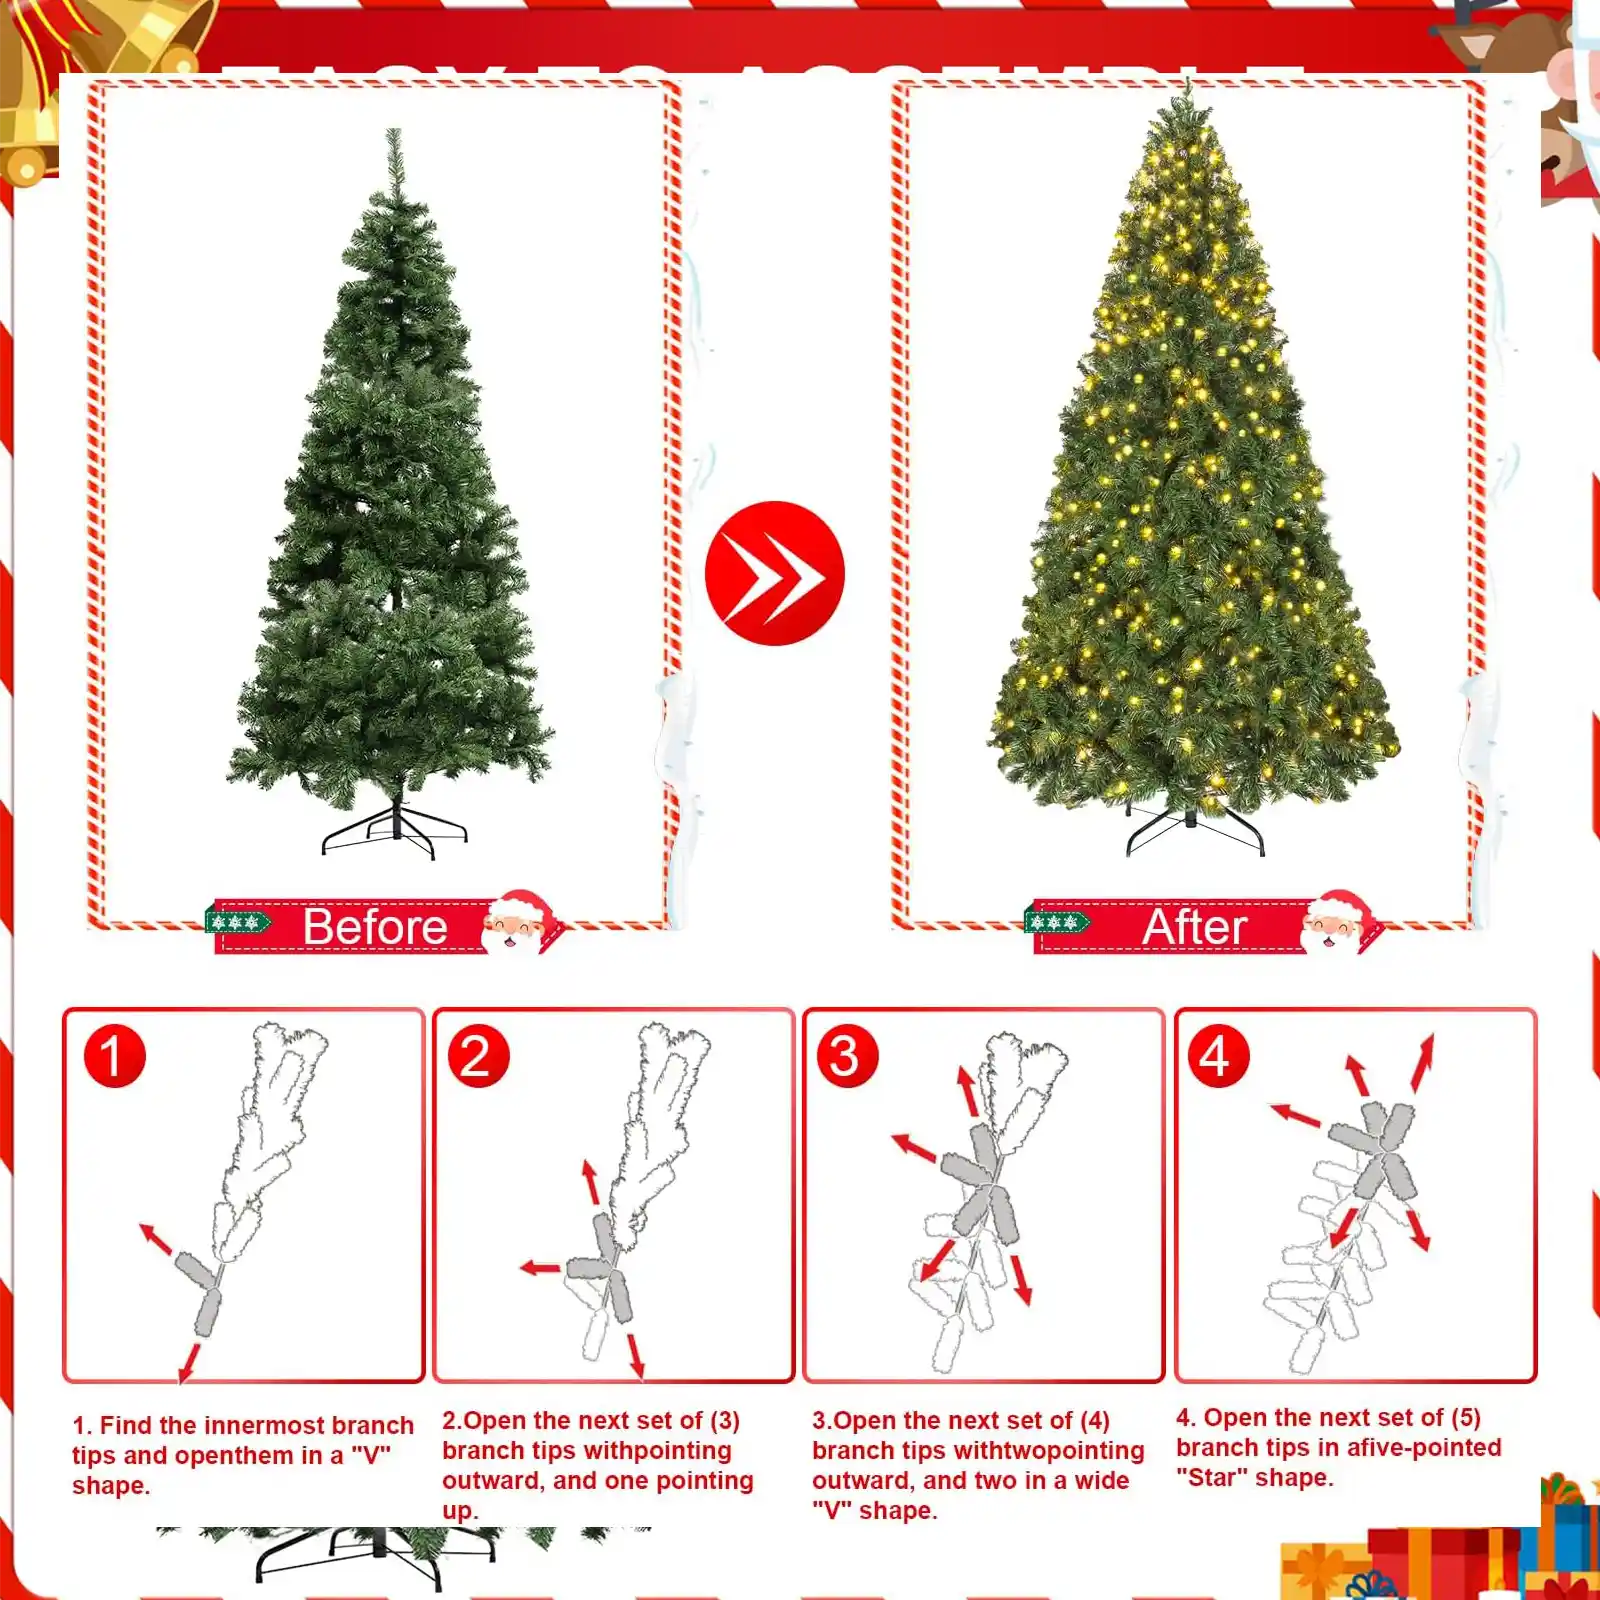 7.5ft Pre-lit Christmas Tree, Spruce Artificial Christmas Tree with Warm White Lights, Xmas Tree with Storage Bag and Metal Stand for Indoor and Outdoor Holiday Decoration